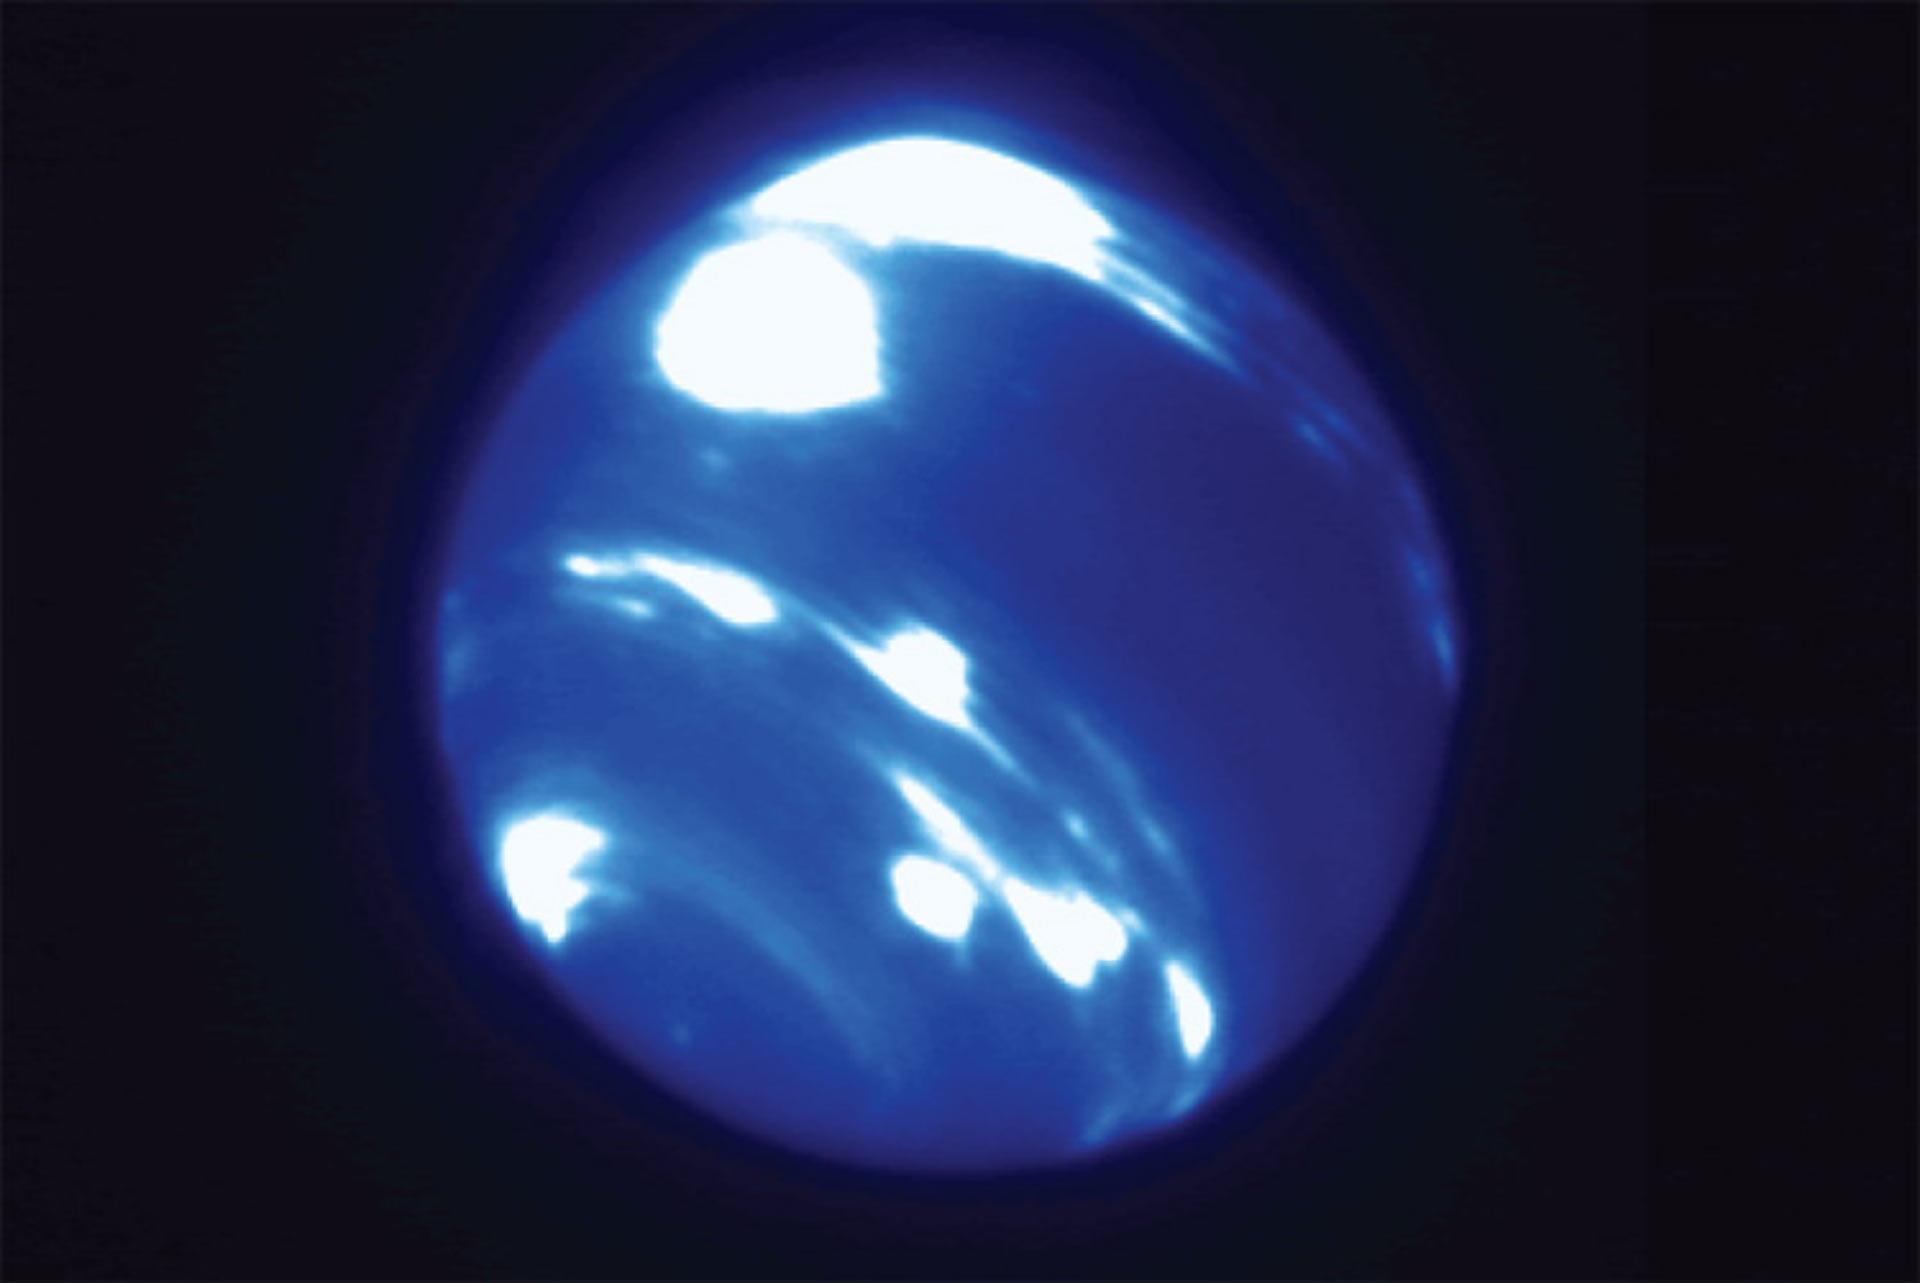 Giant, Extremely Bright Storm System Spotted in Neptune's Atmosphere ...